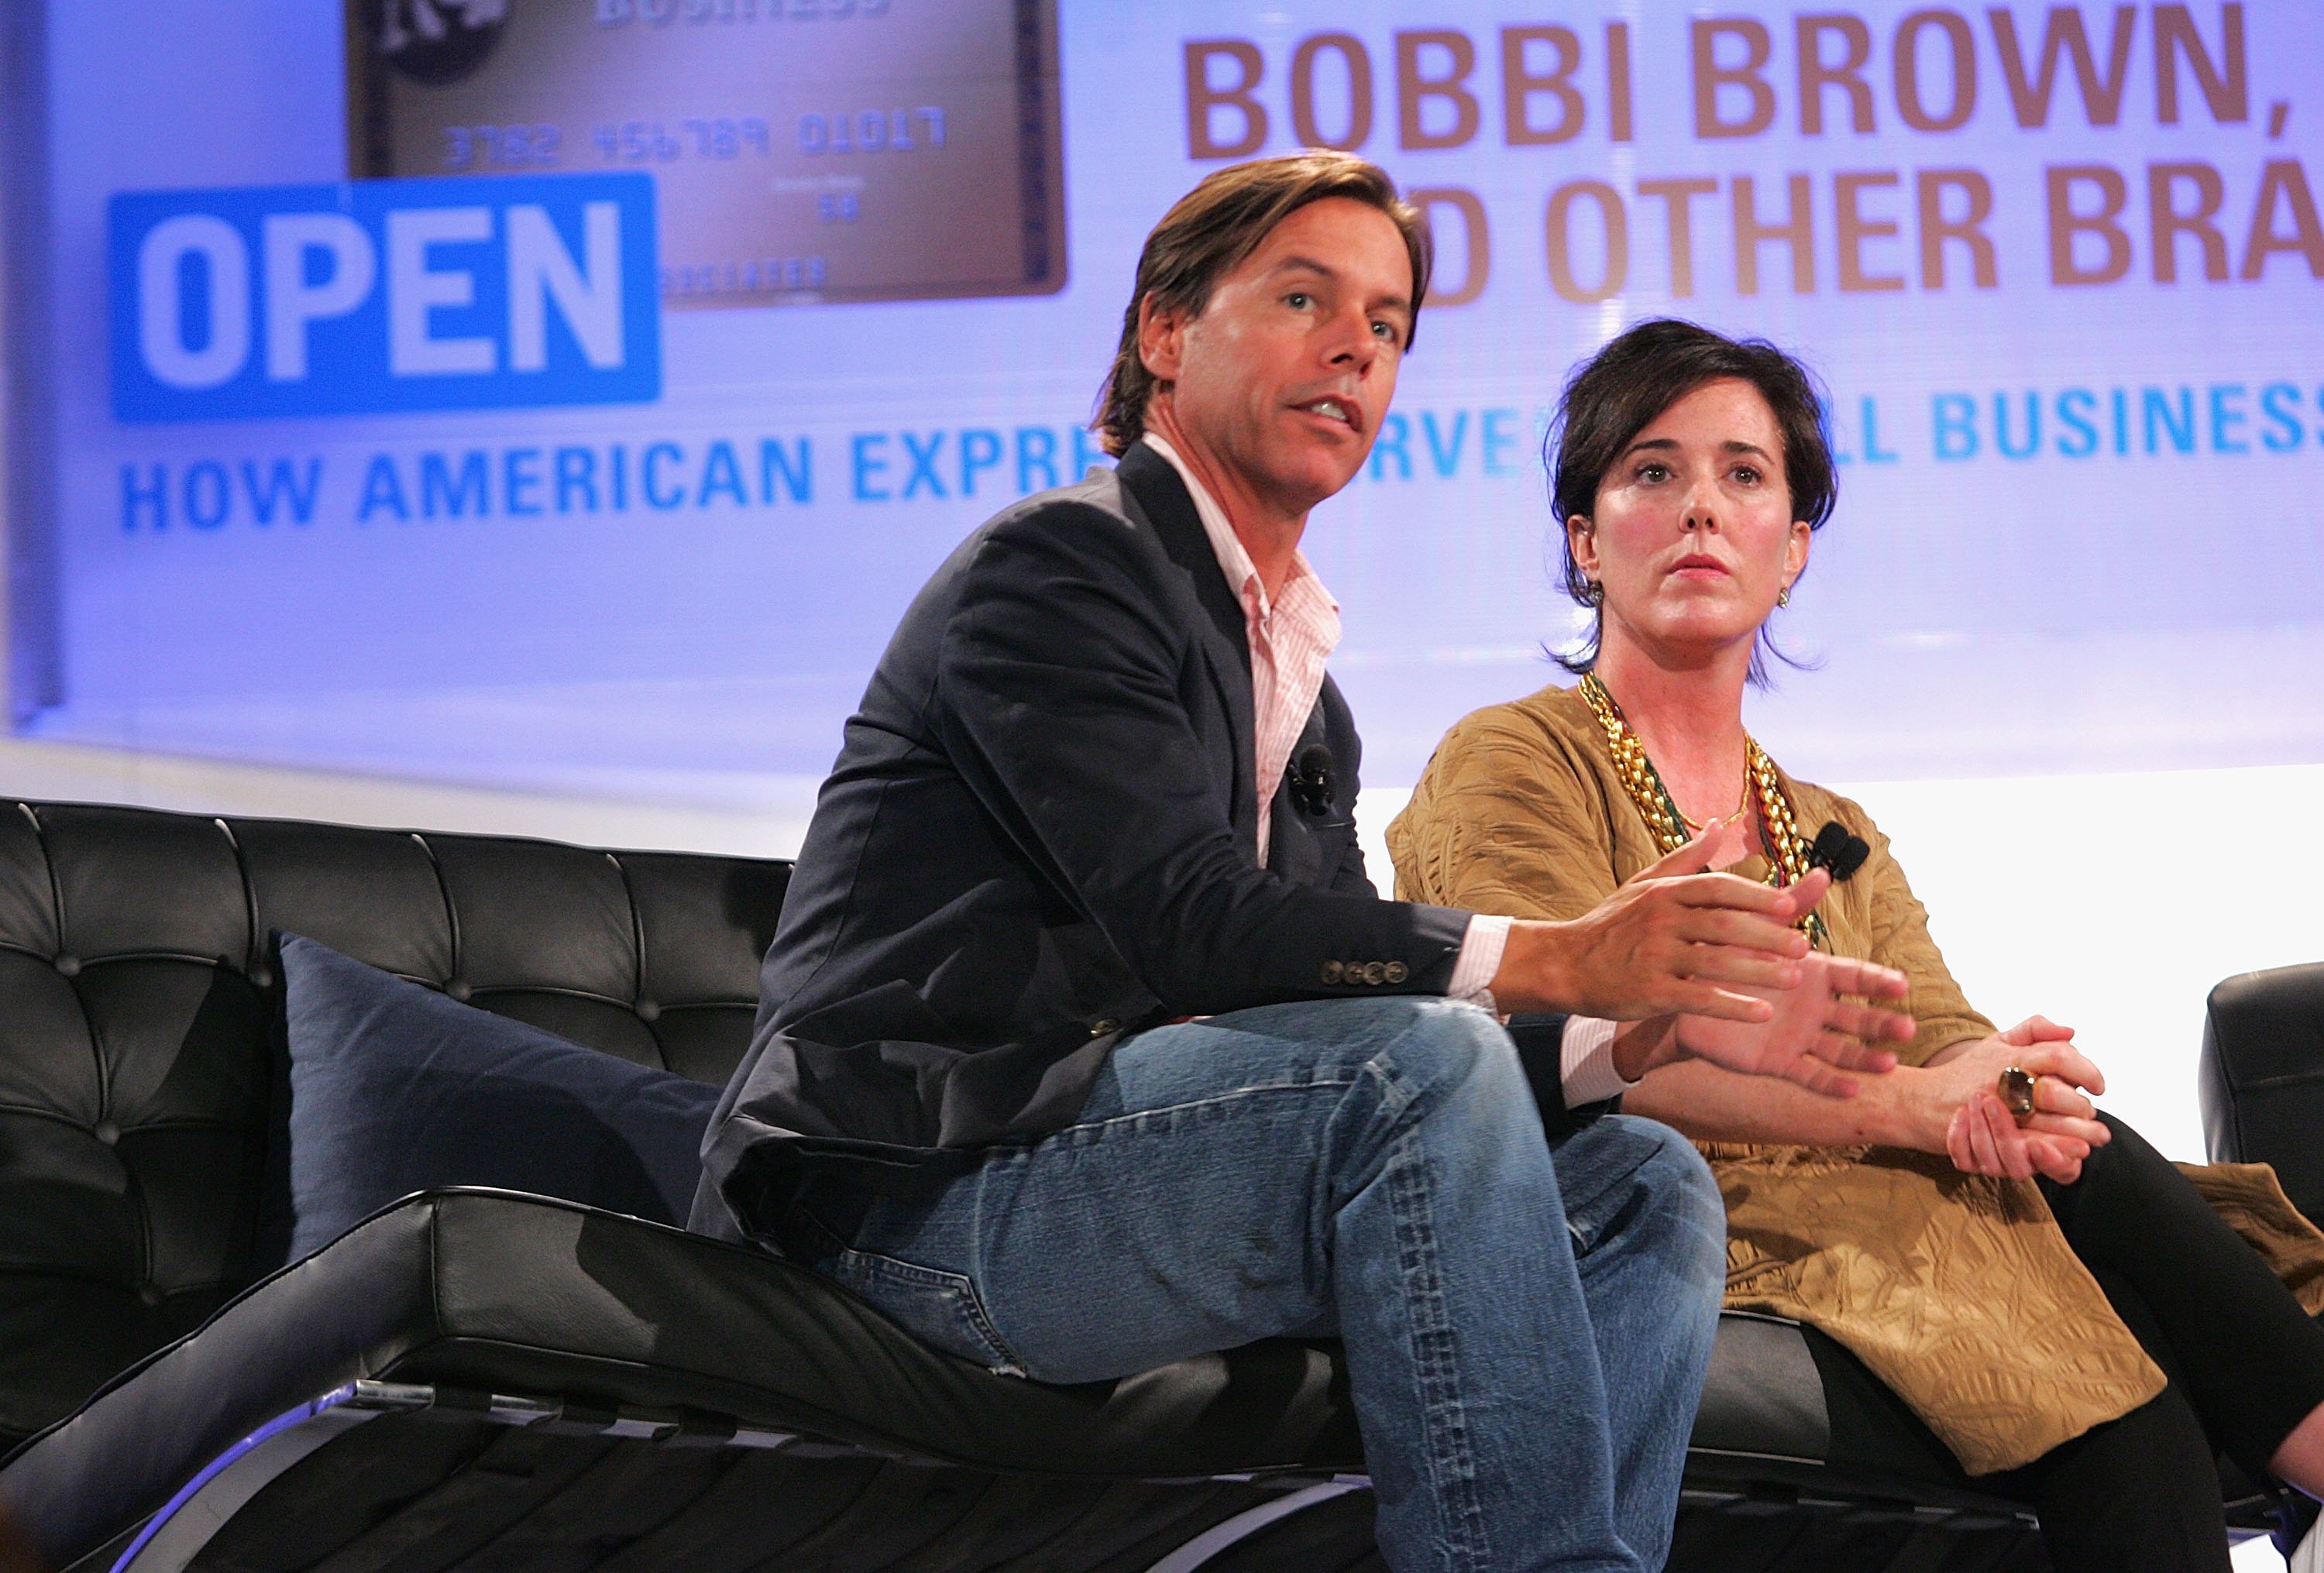 Andy Spade, CEO and Creative Director of Kate Spade, and designer Kate Spade at OPEN from American Express' "Making a Name for Yourself" at Nokia Theater July 27, 2006 in New York City.. | Source: Getty Images